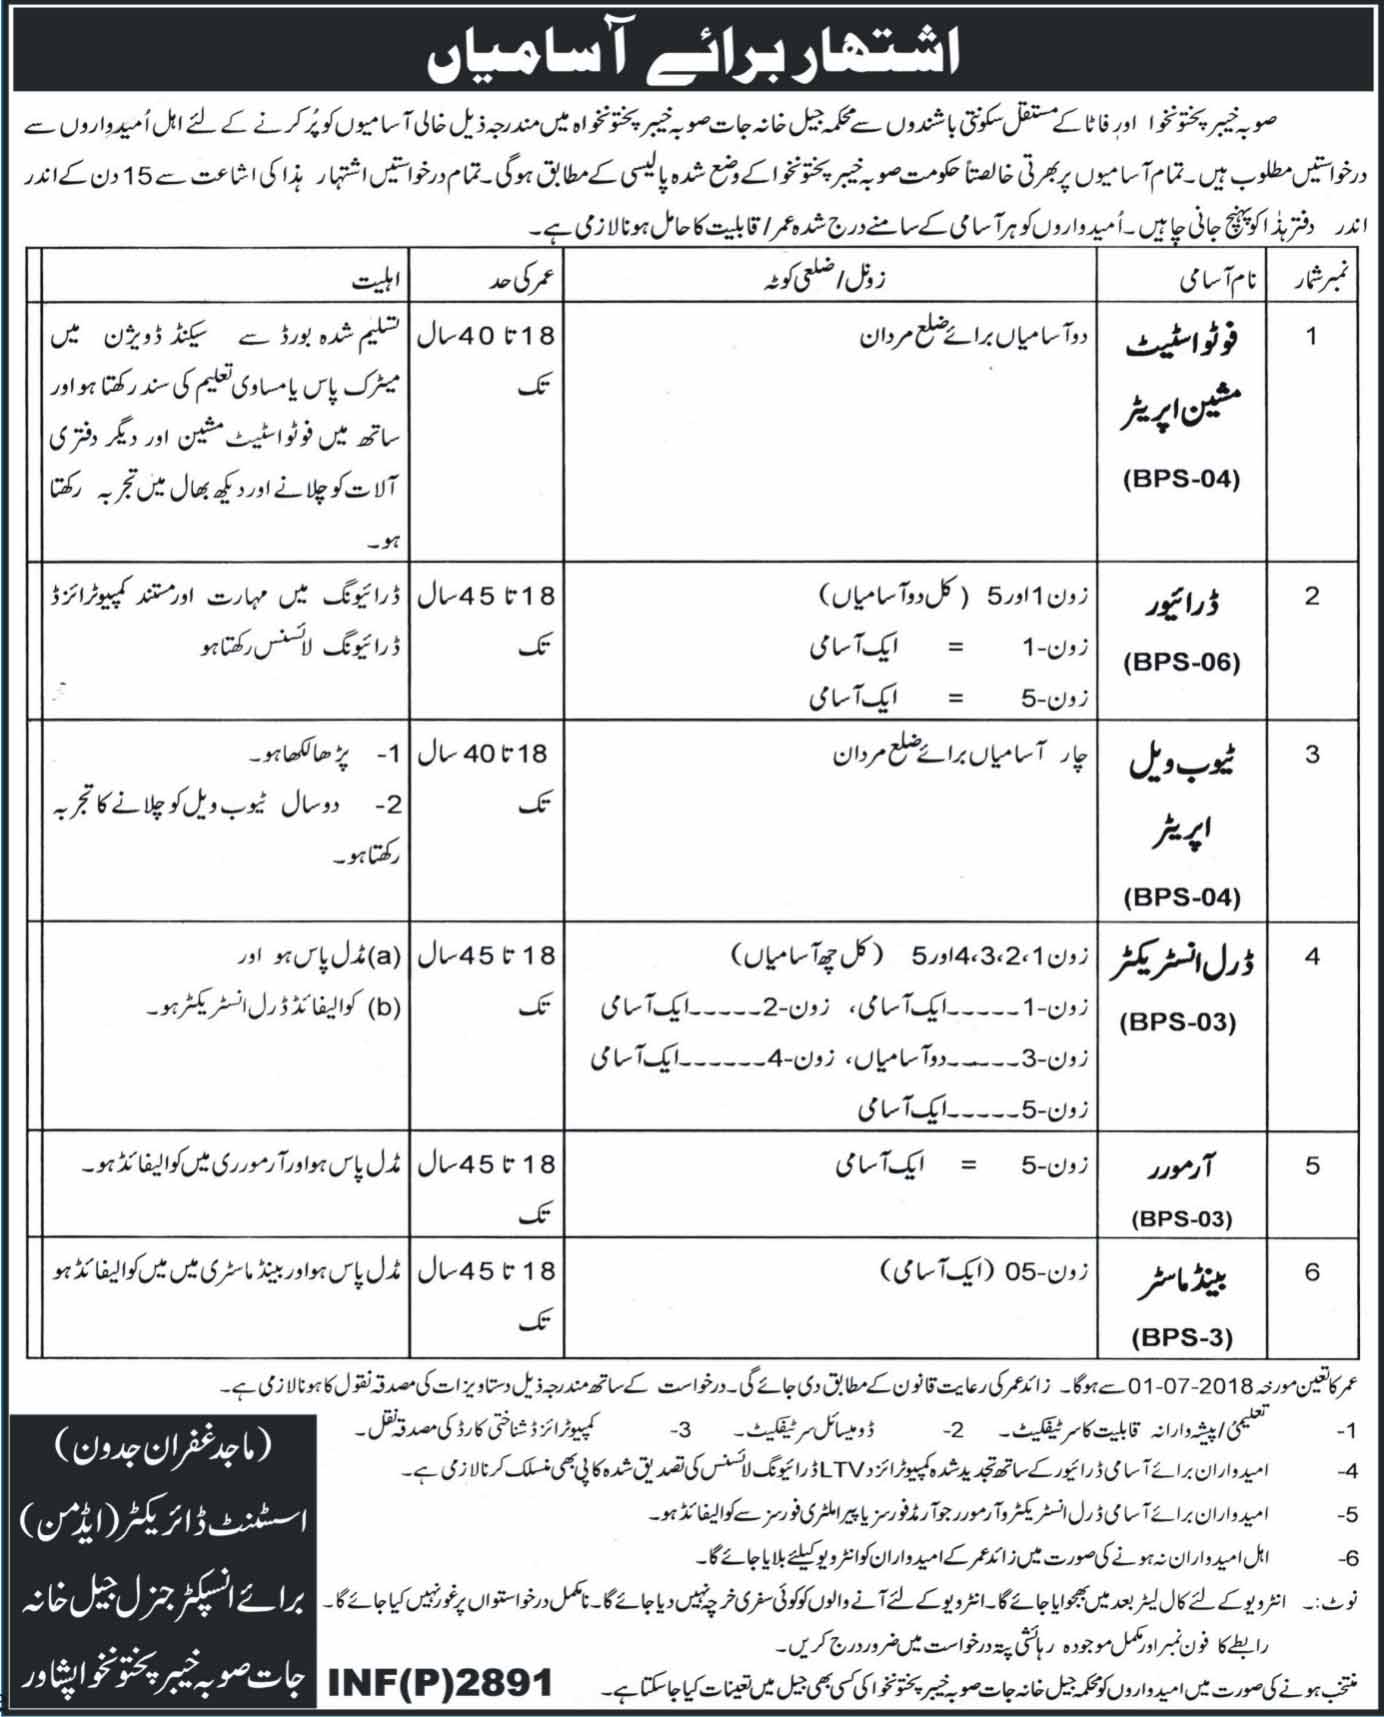 Prison Department KPK Jobs 2018 for Drill Instructors, Tube well Operators, Drivers & Others